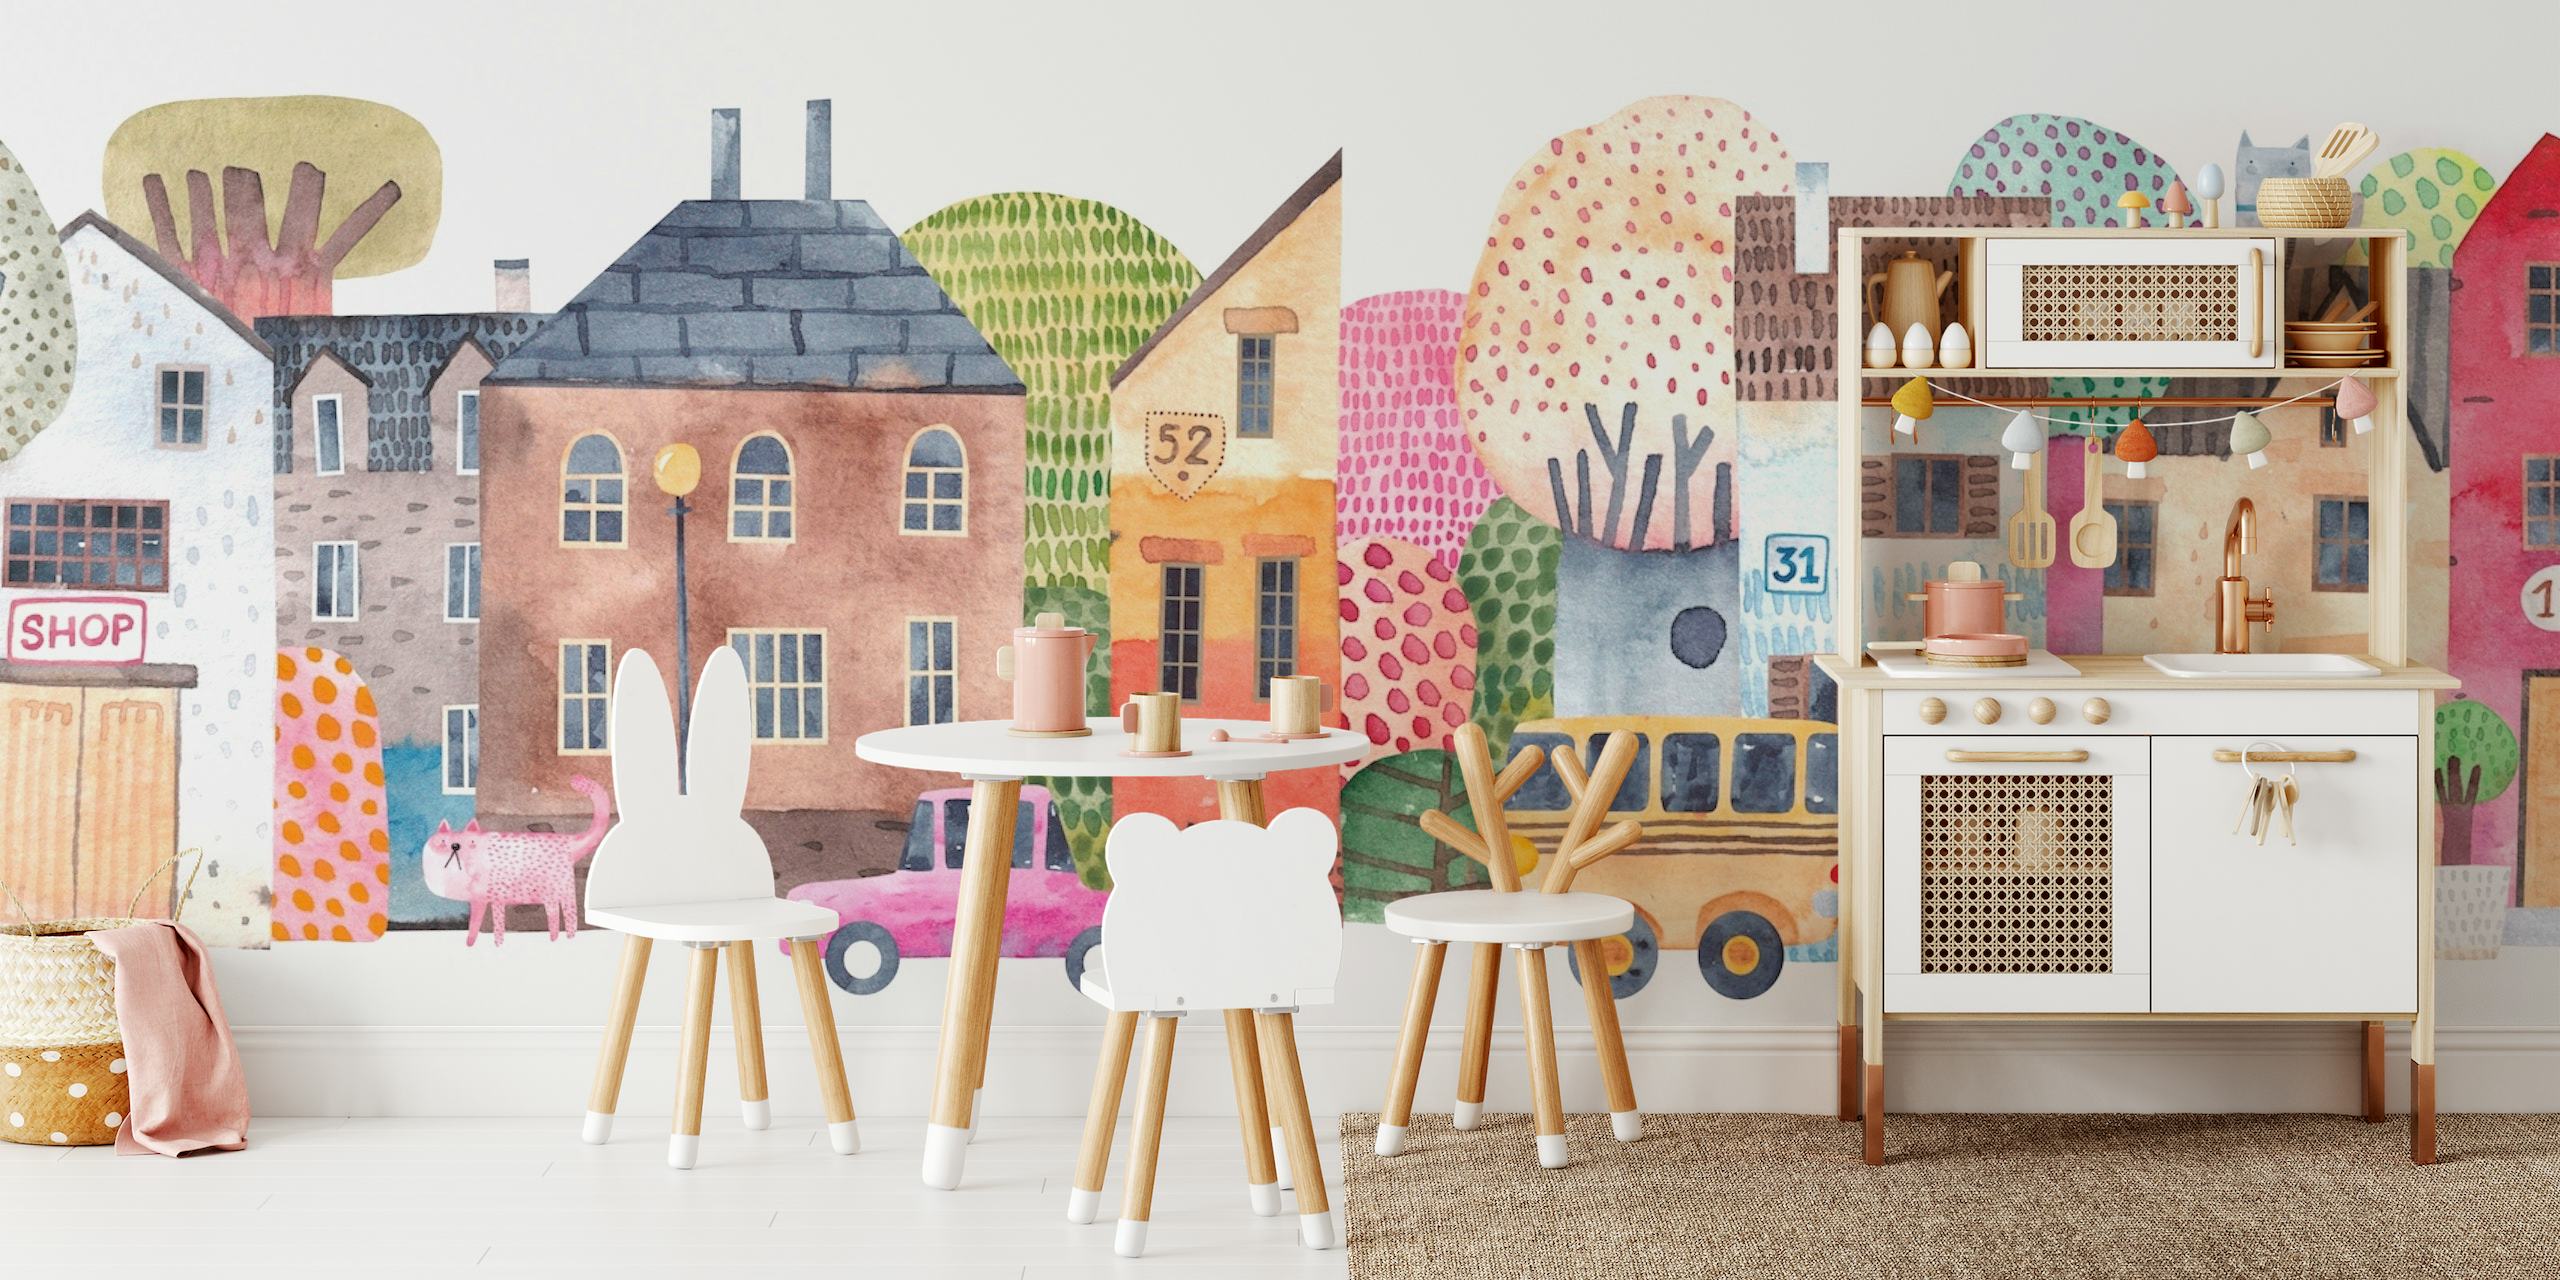 Colorful illustration of a whimsical town with unique, playful buildings and vehicles against a white background.